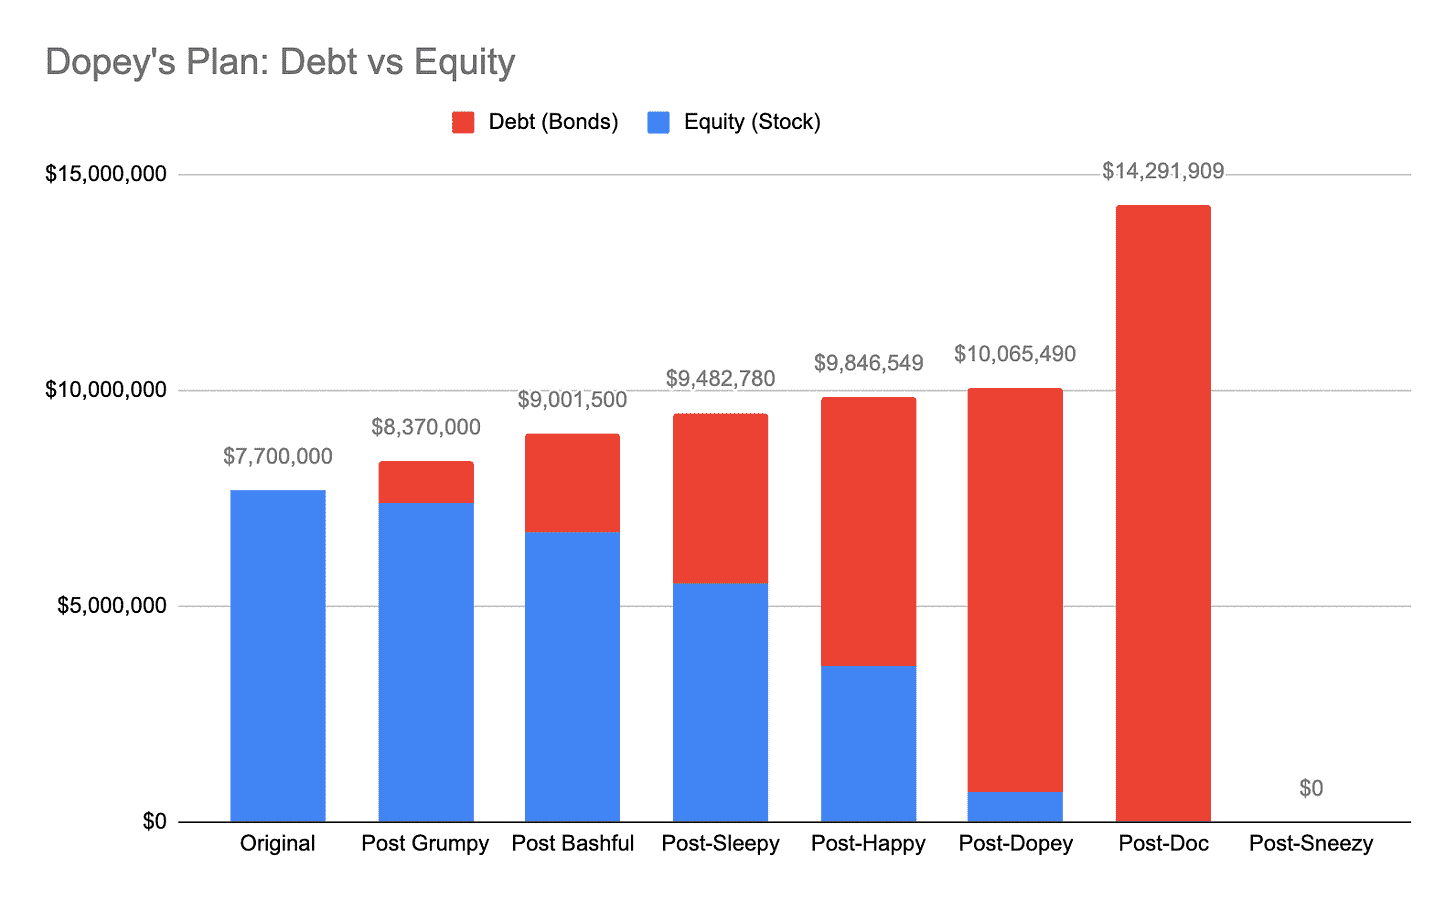 Debt vs. Equity: The Risk and Reward of Leverage: Dopey's Debt Plan